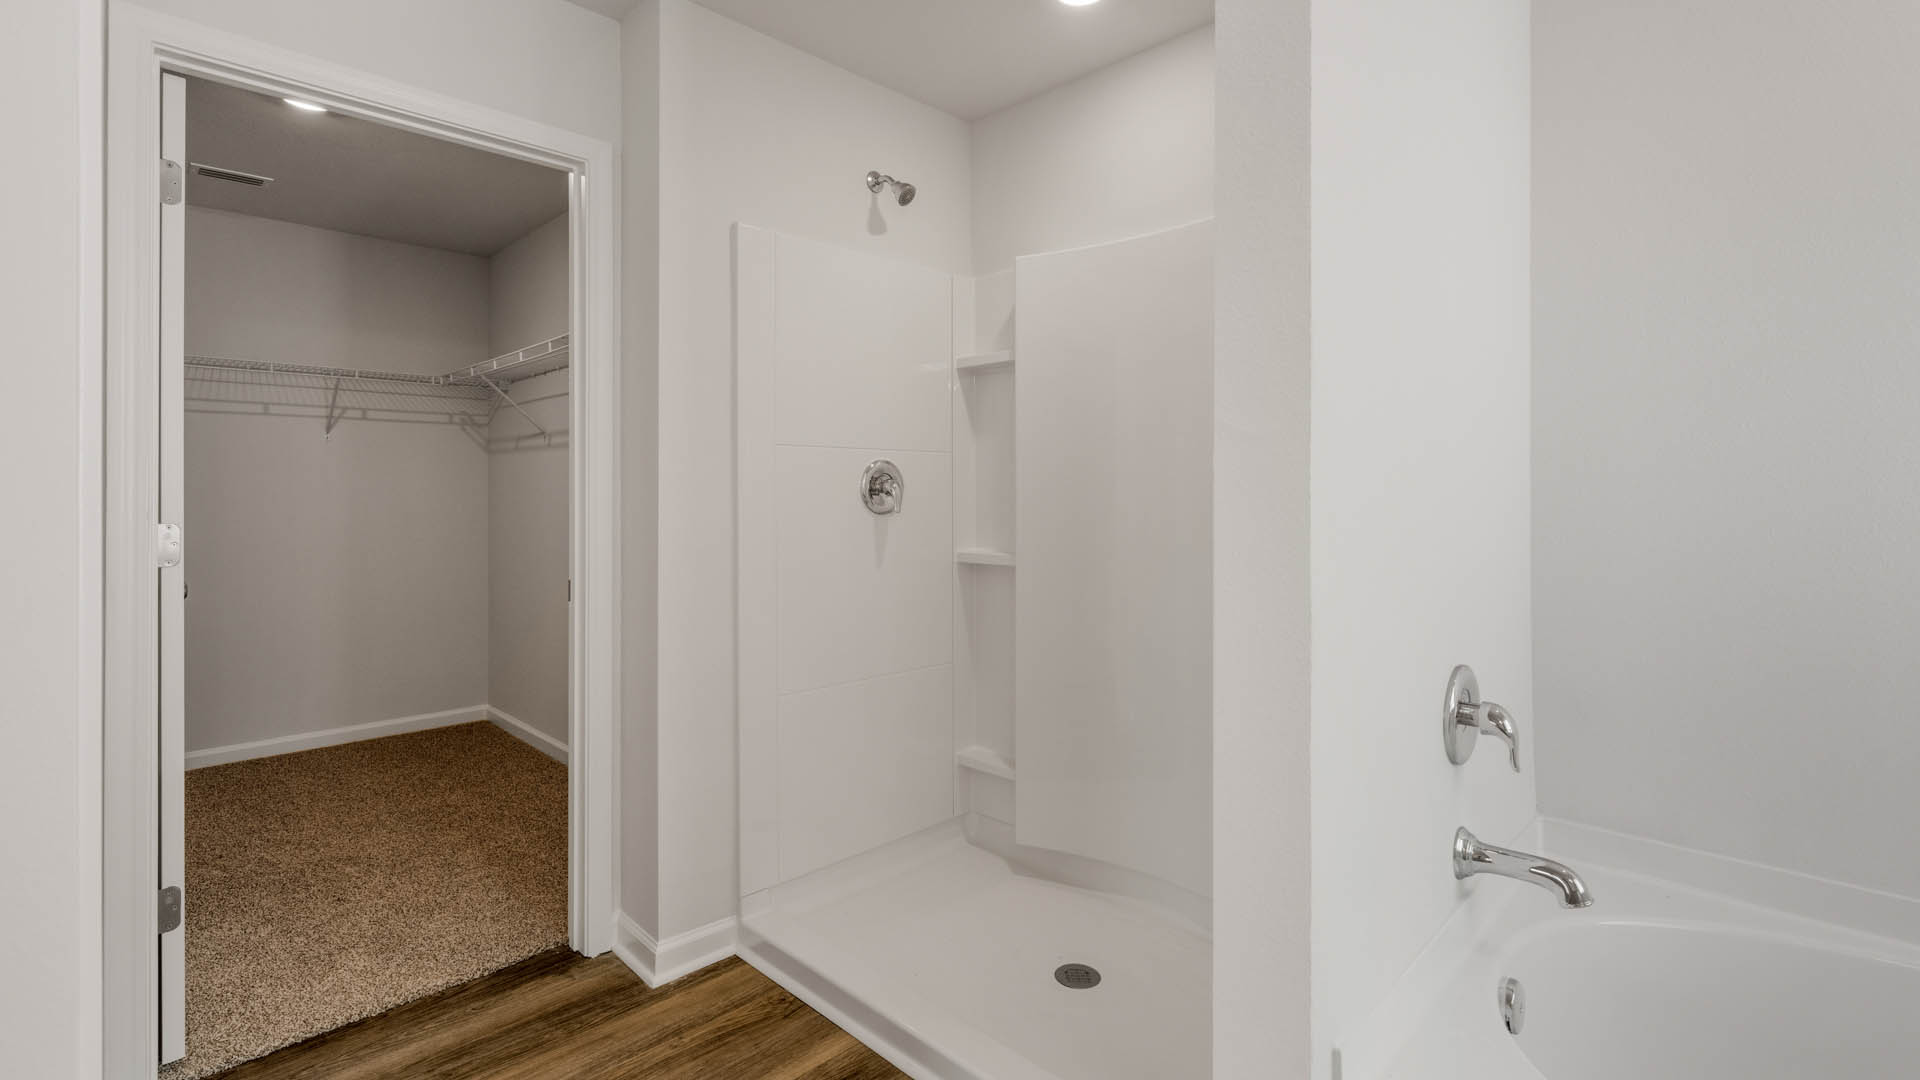 Primary bathroom with separate tub and shower and walk-in closet.